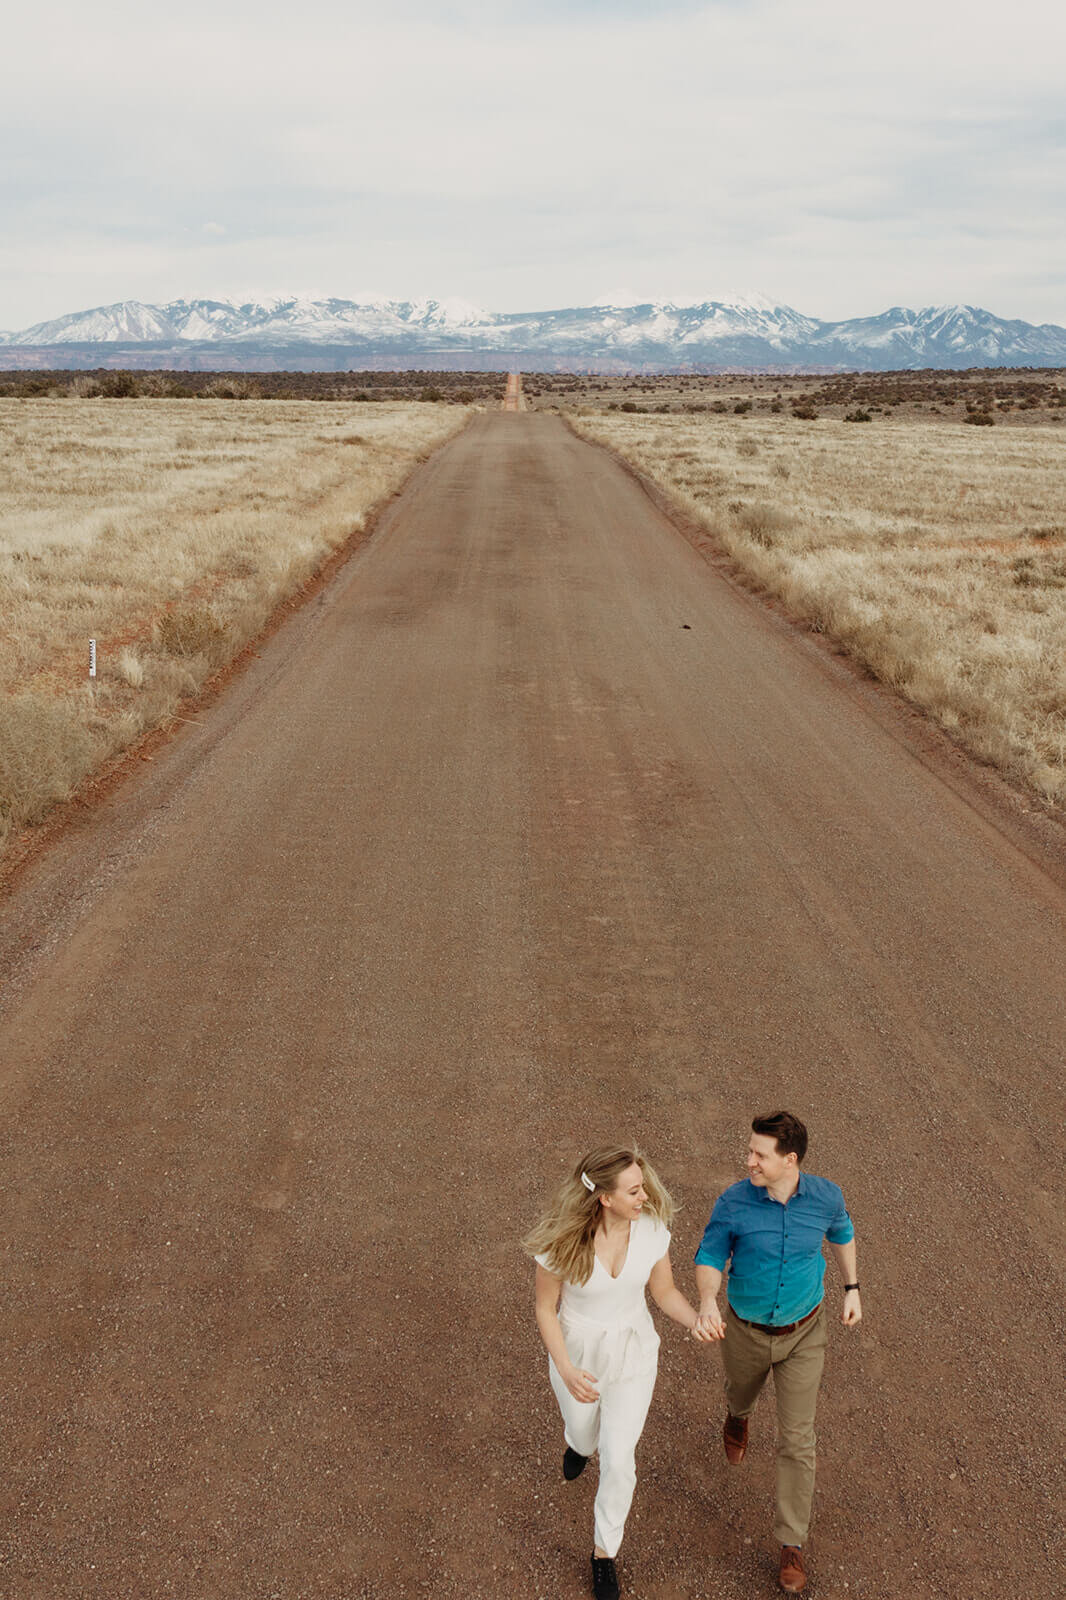  Couple celebrates anniversary at Dead Horse Point State Park and the La Sal Mountains near Moab, Utah with incredible views and hiking. Utah wedding photographer 